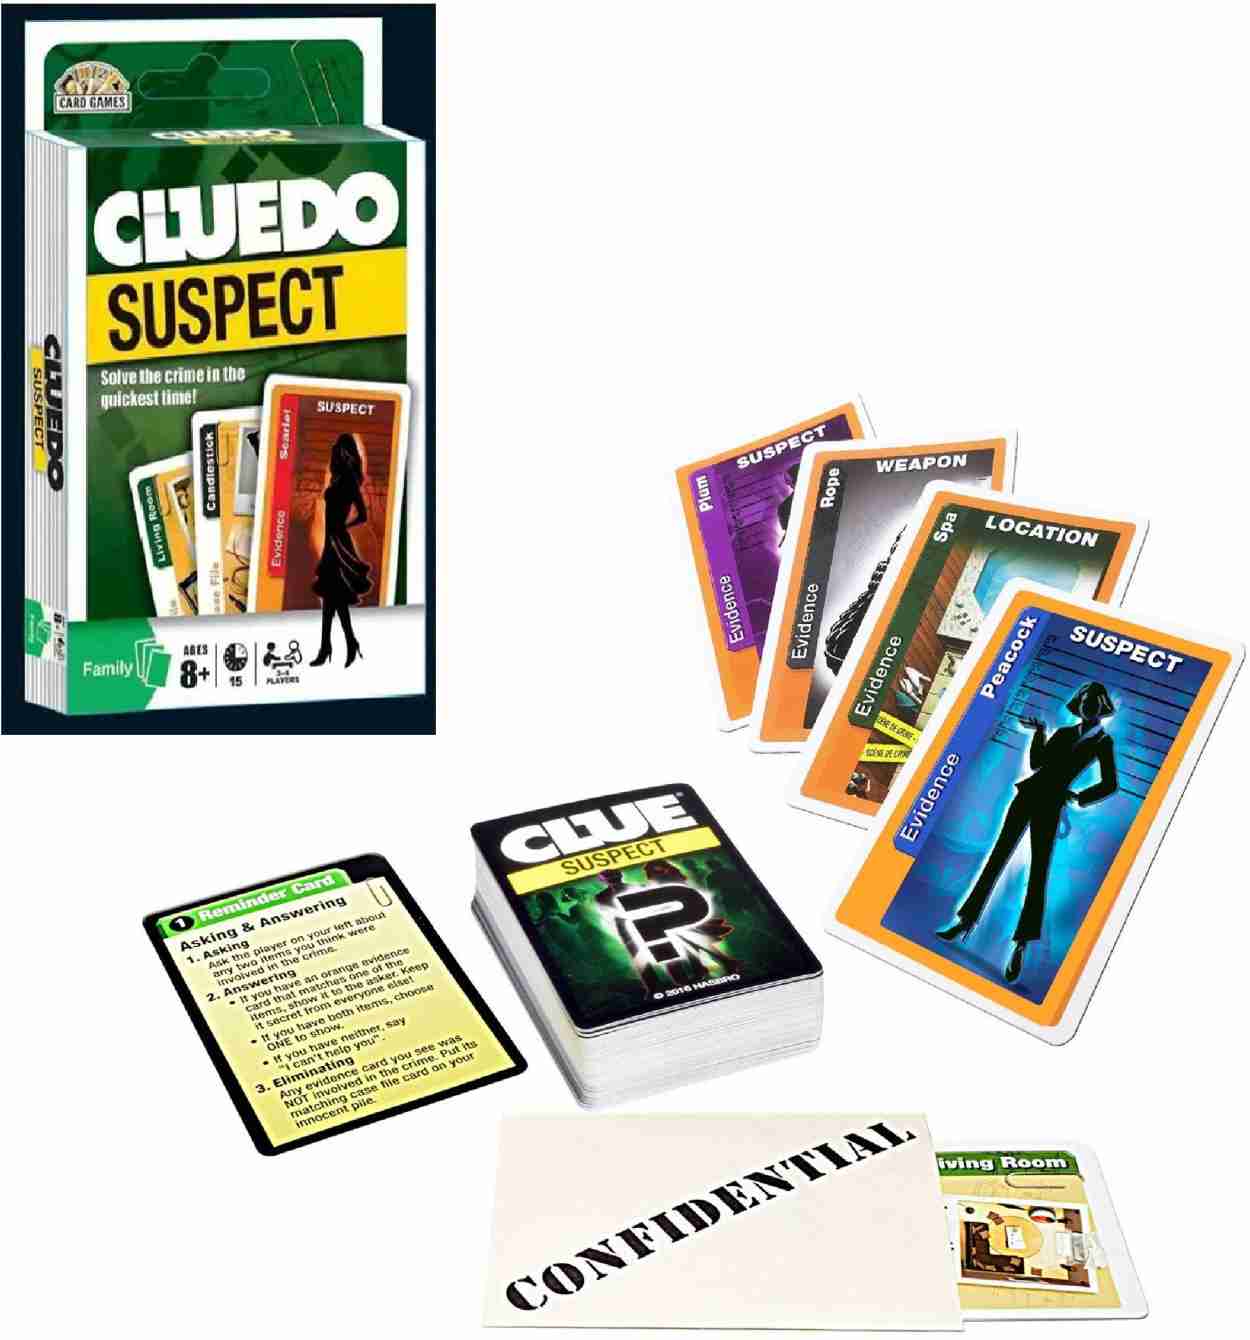 monopoly plastic Cluedo Suspect Card Game for Kids - Fun of Guess Who Clue in Minutes, Detective Cluedo Board Game for Family Friends, Best Party Card Game